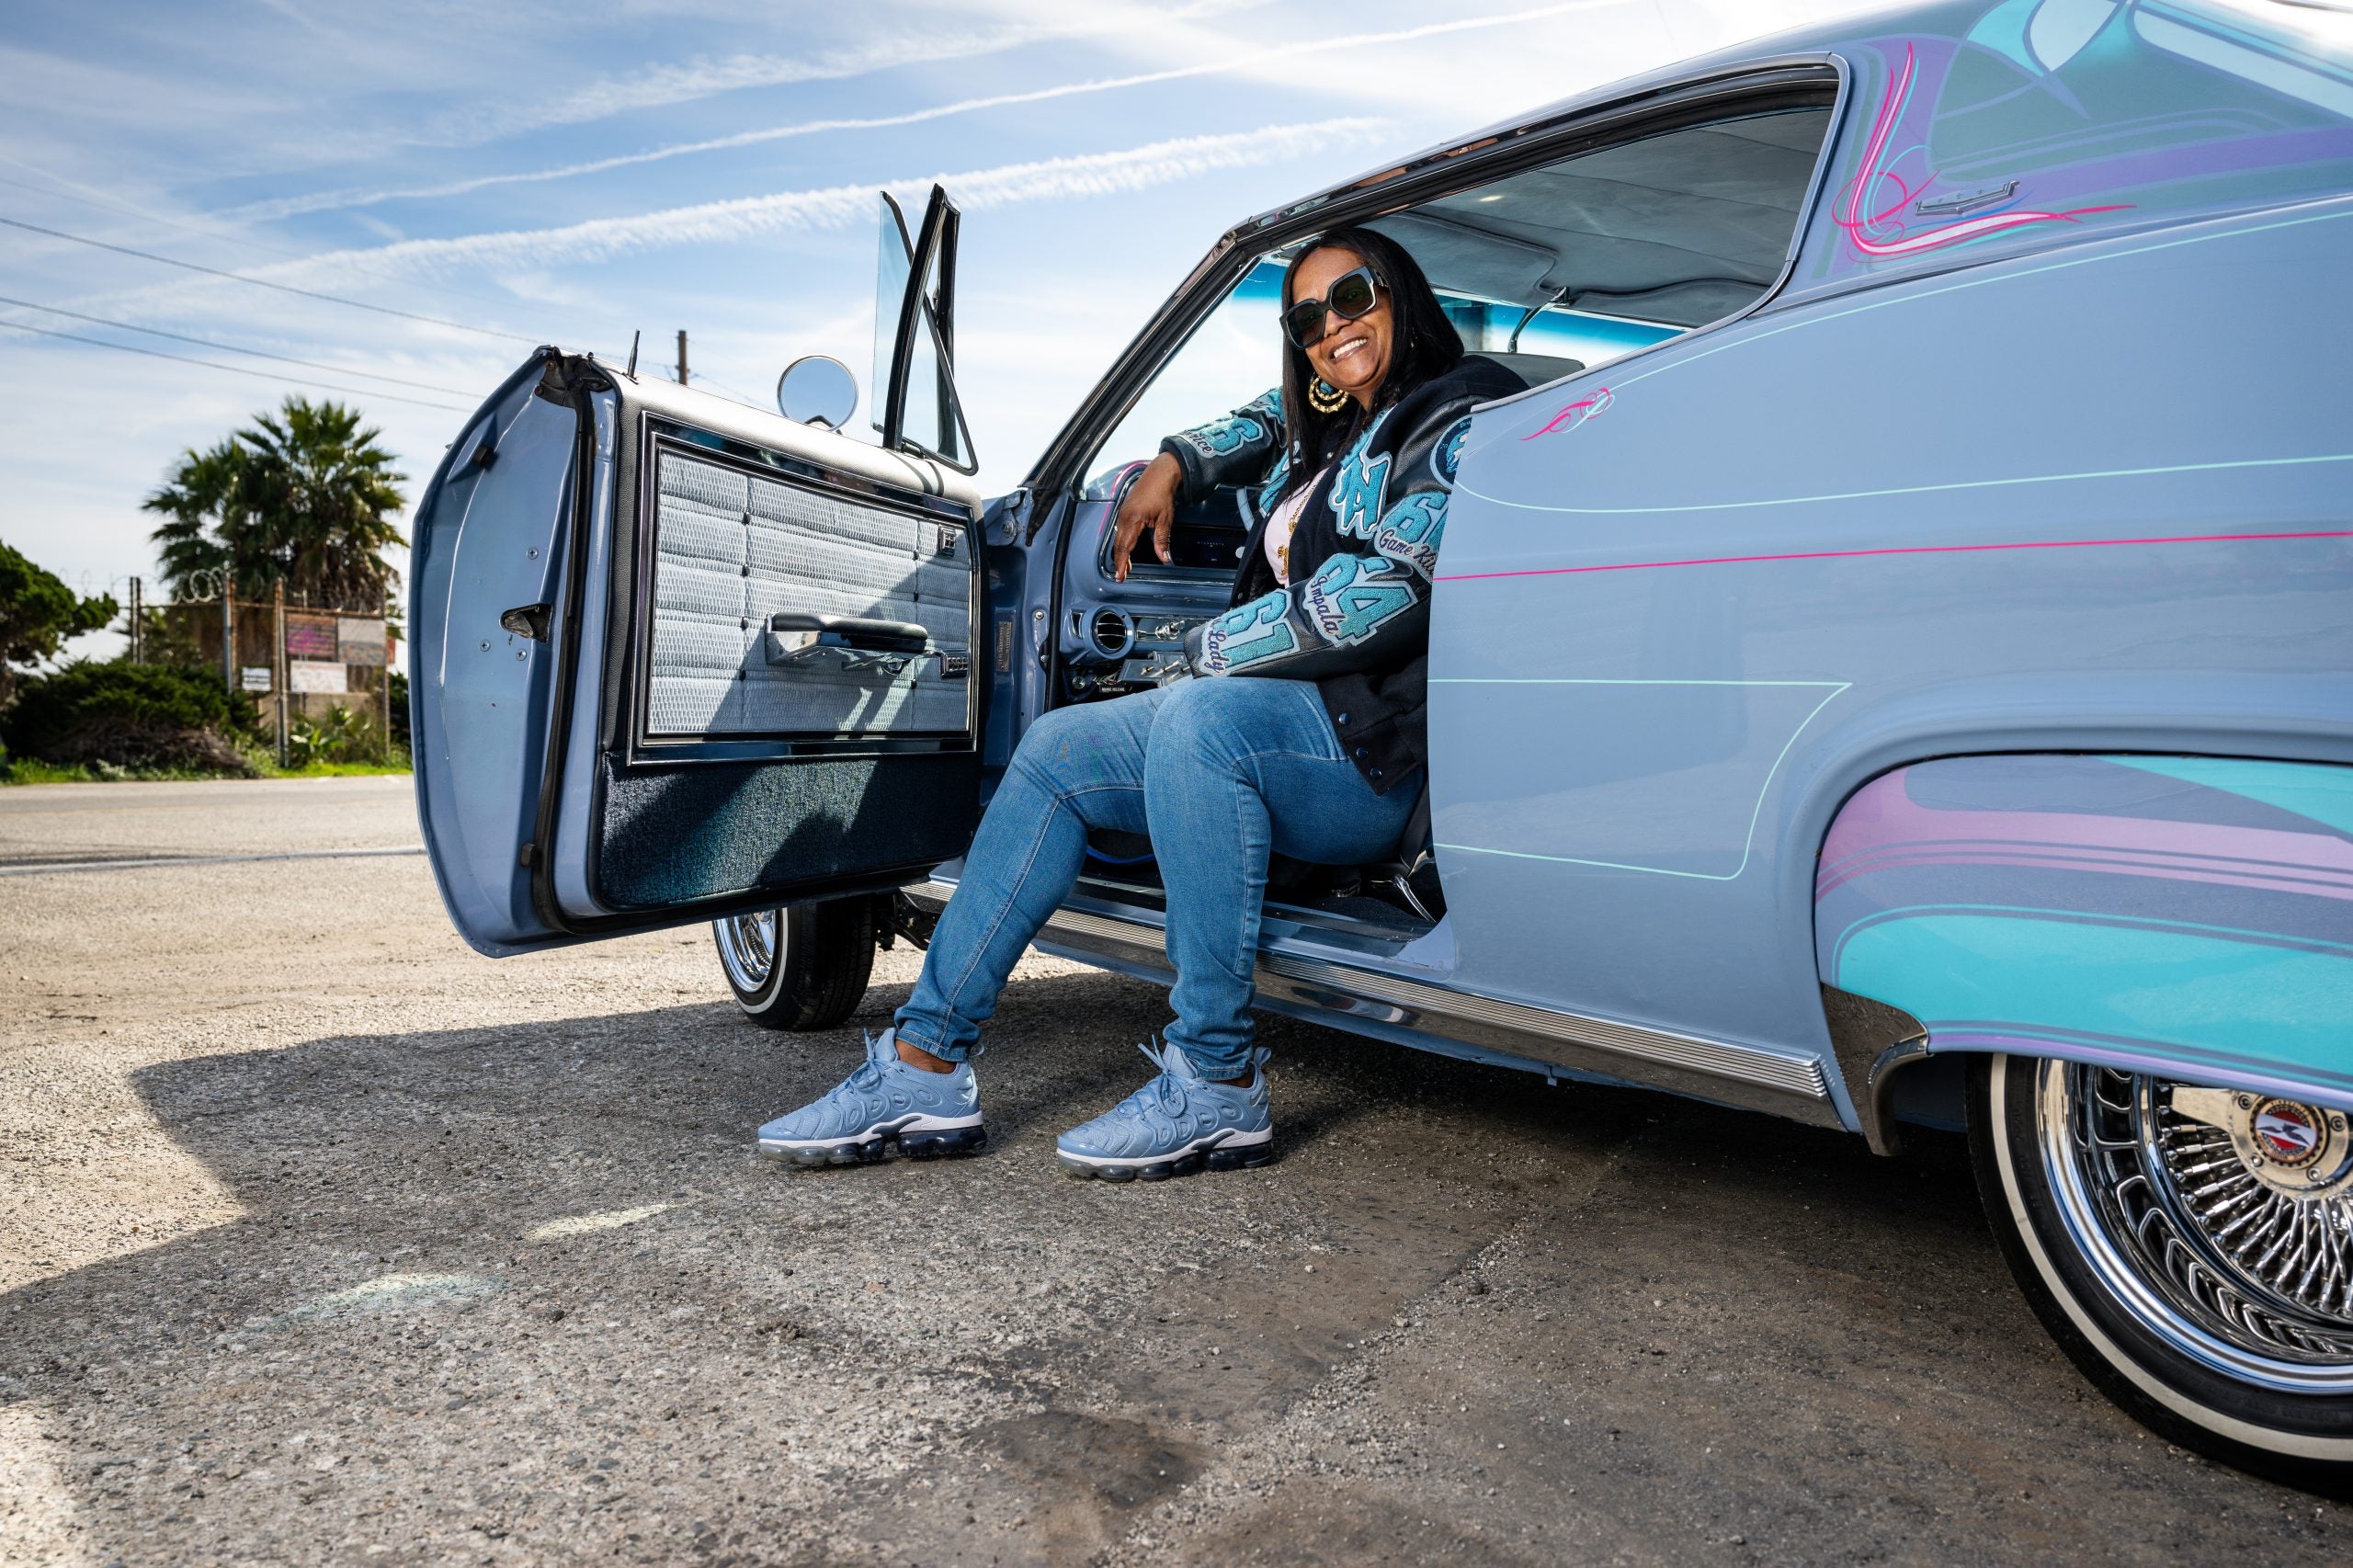 The Disruptors: Tina Blankenship Is Inspiring Women To Be Lowriders